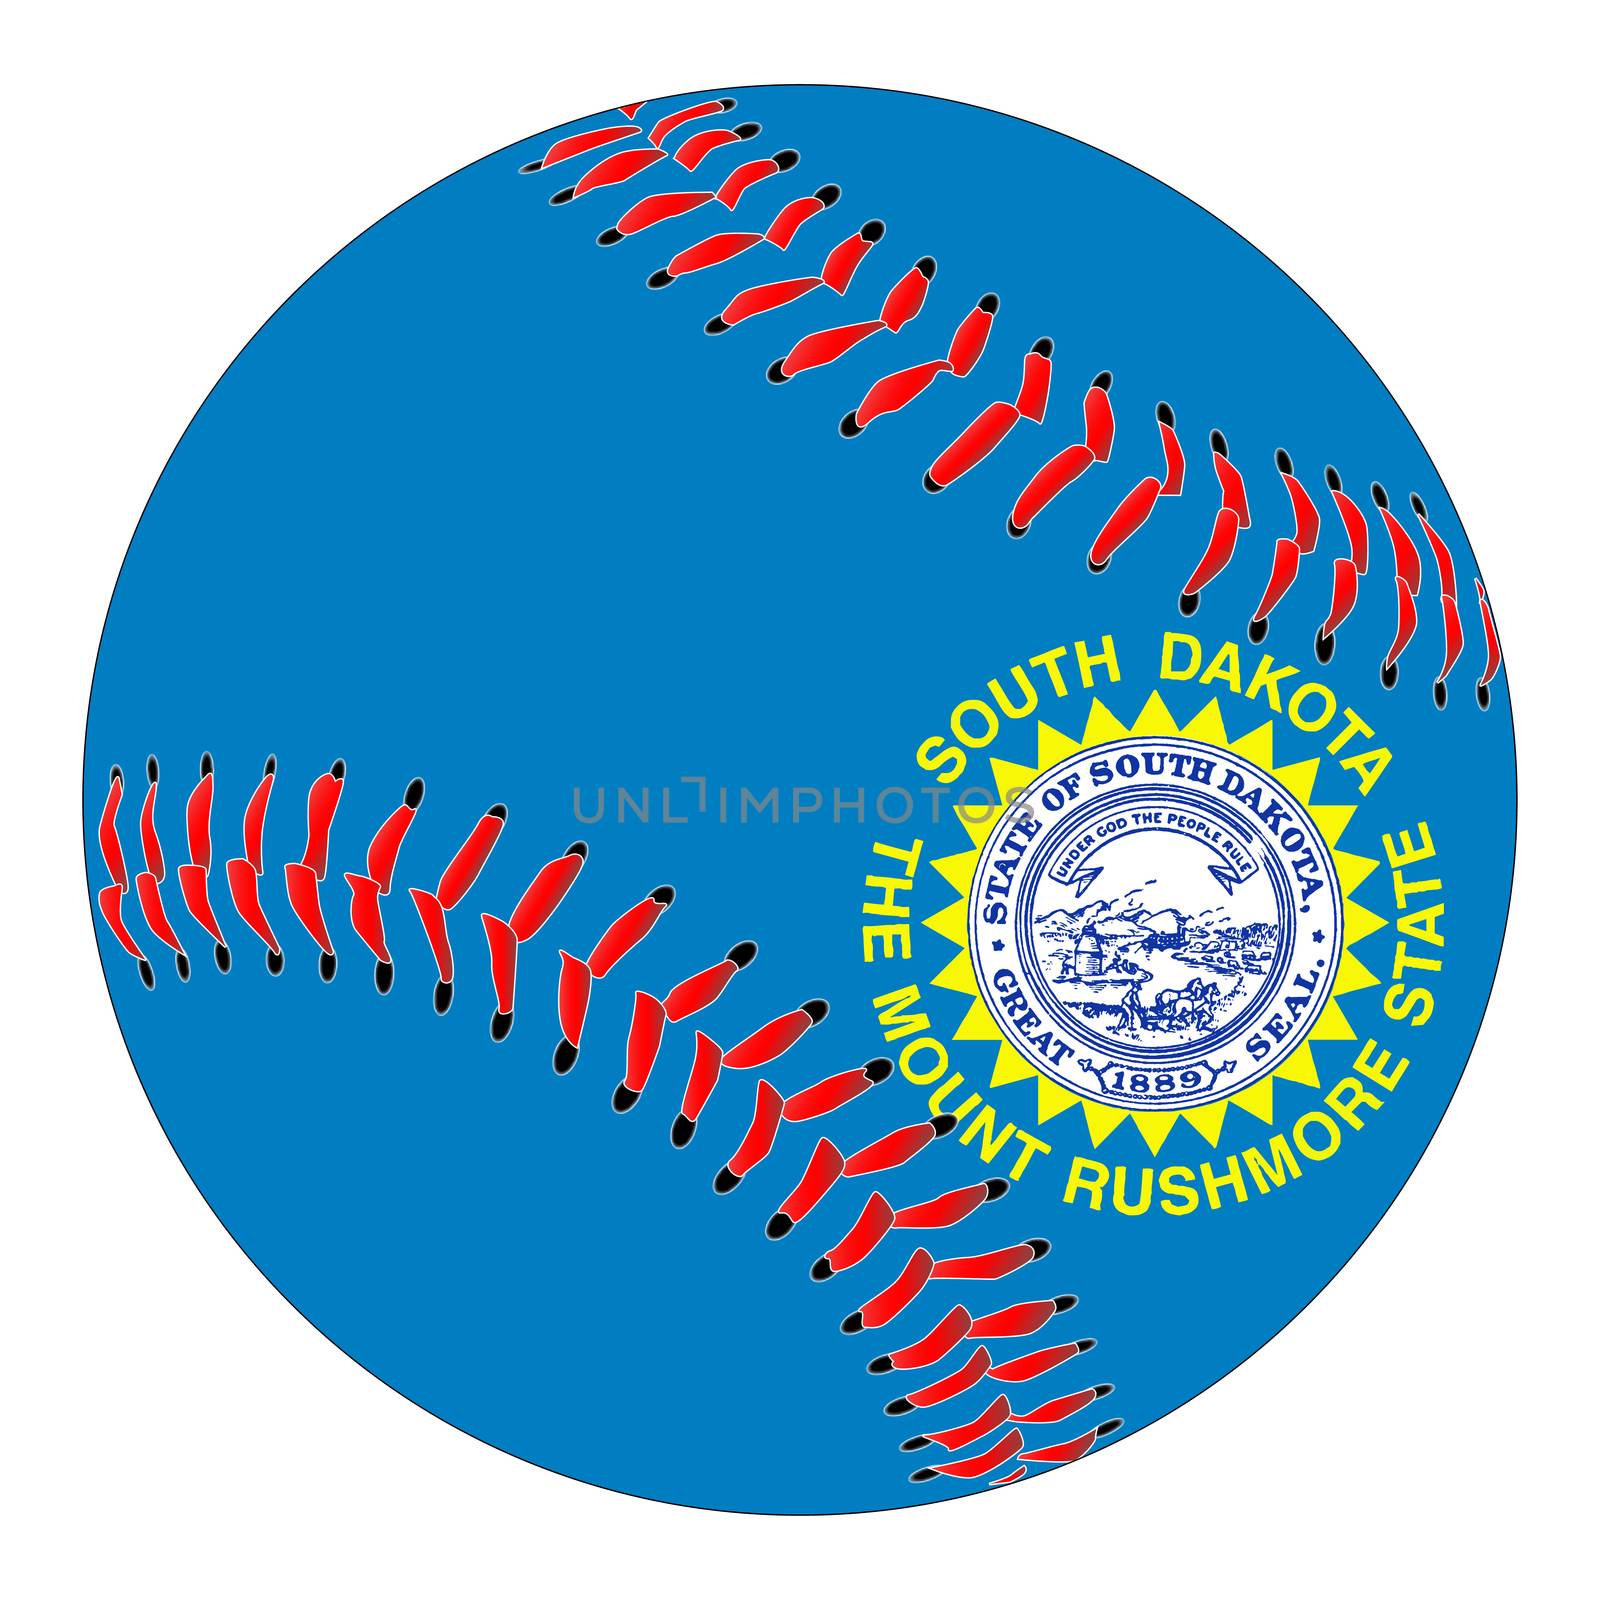 A new white baseball with red stitching with the South Dakota state flag overlay isolated on white